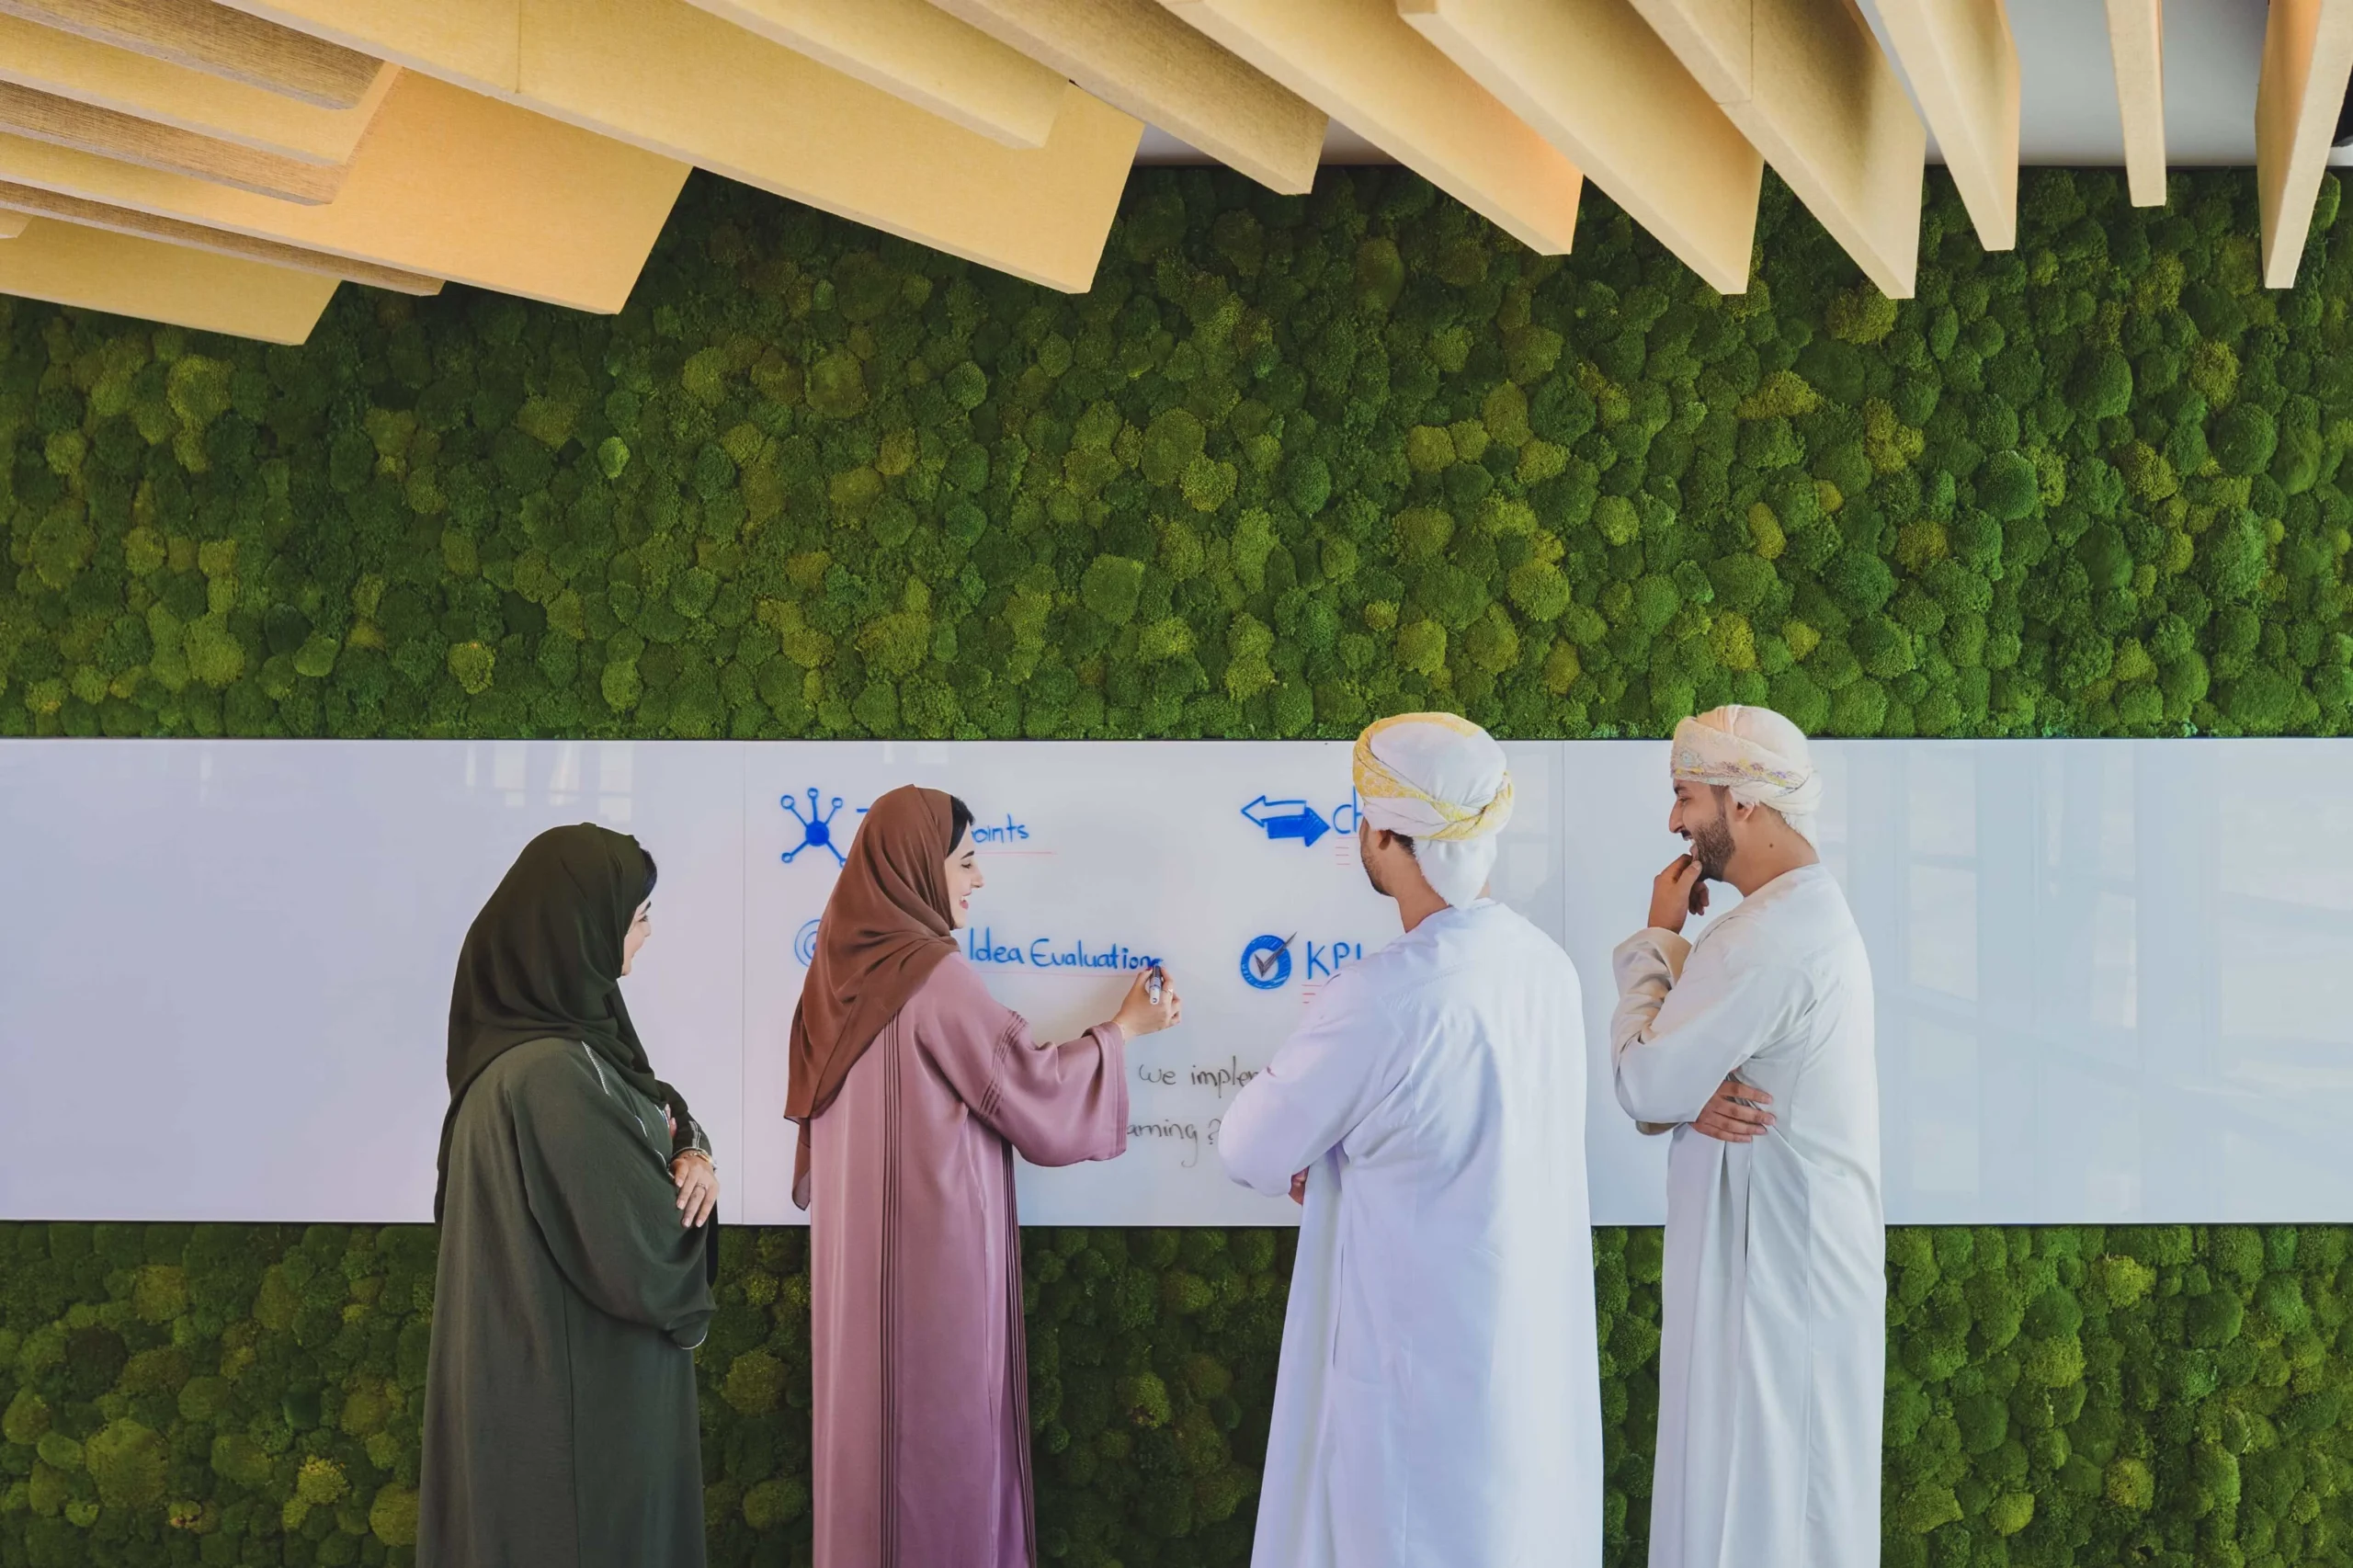 Omantel: social responsibility is an integral part of our business strategy